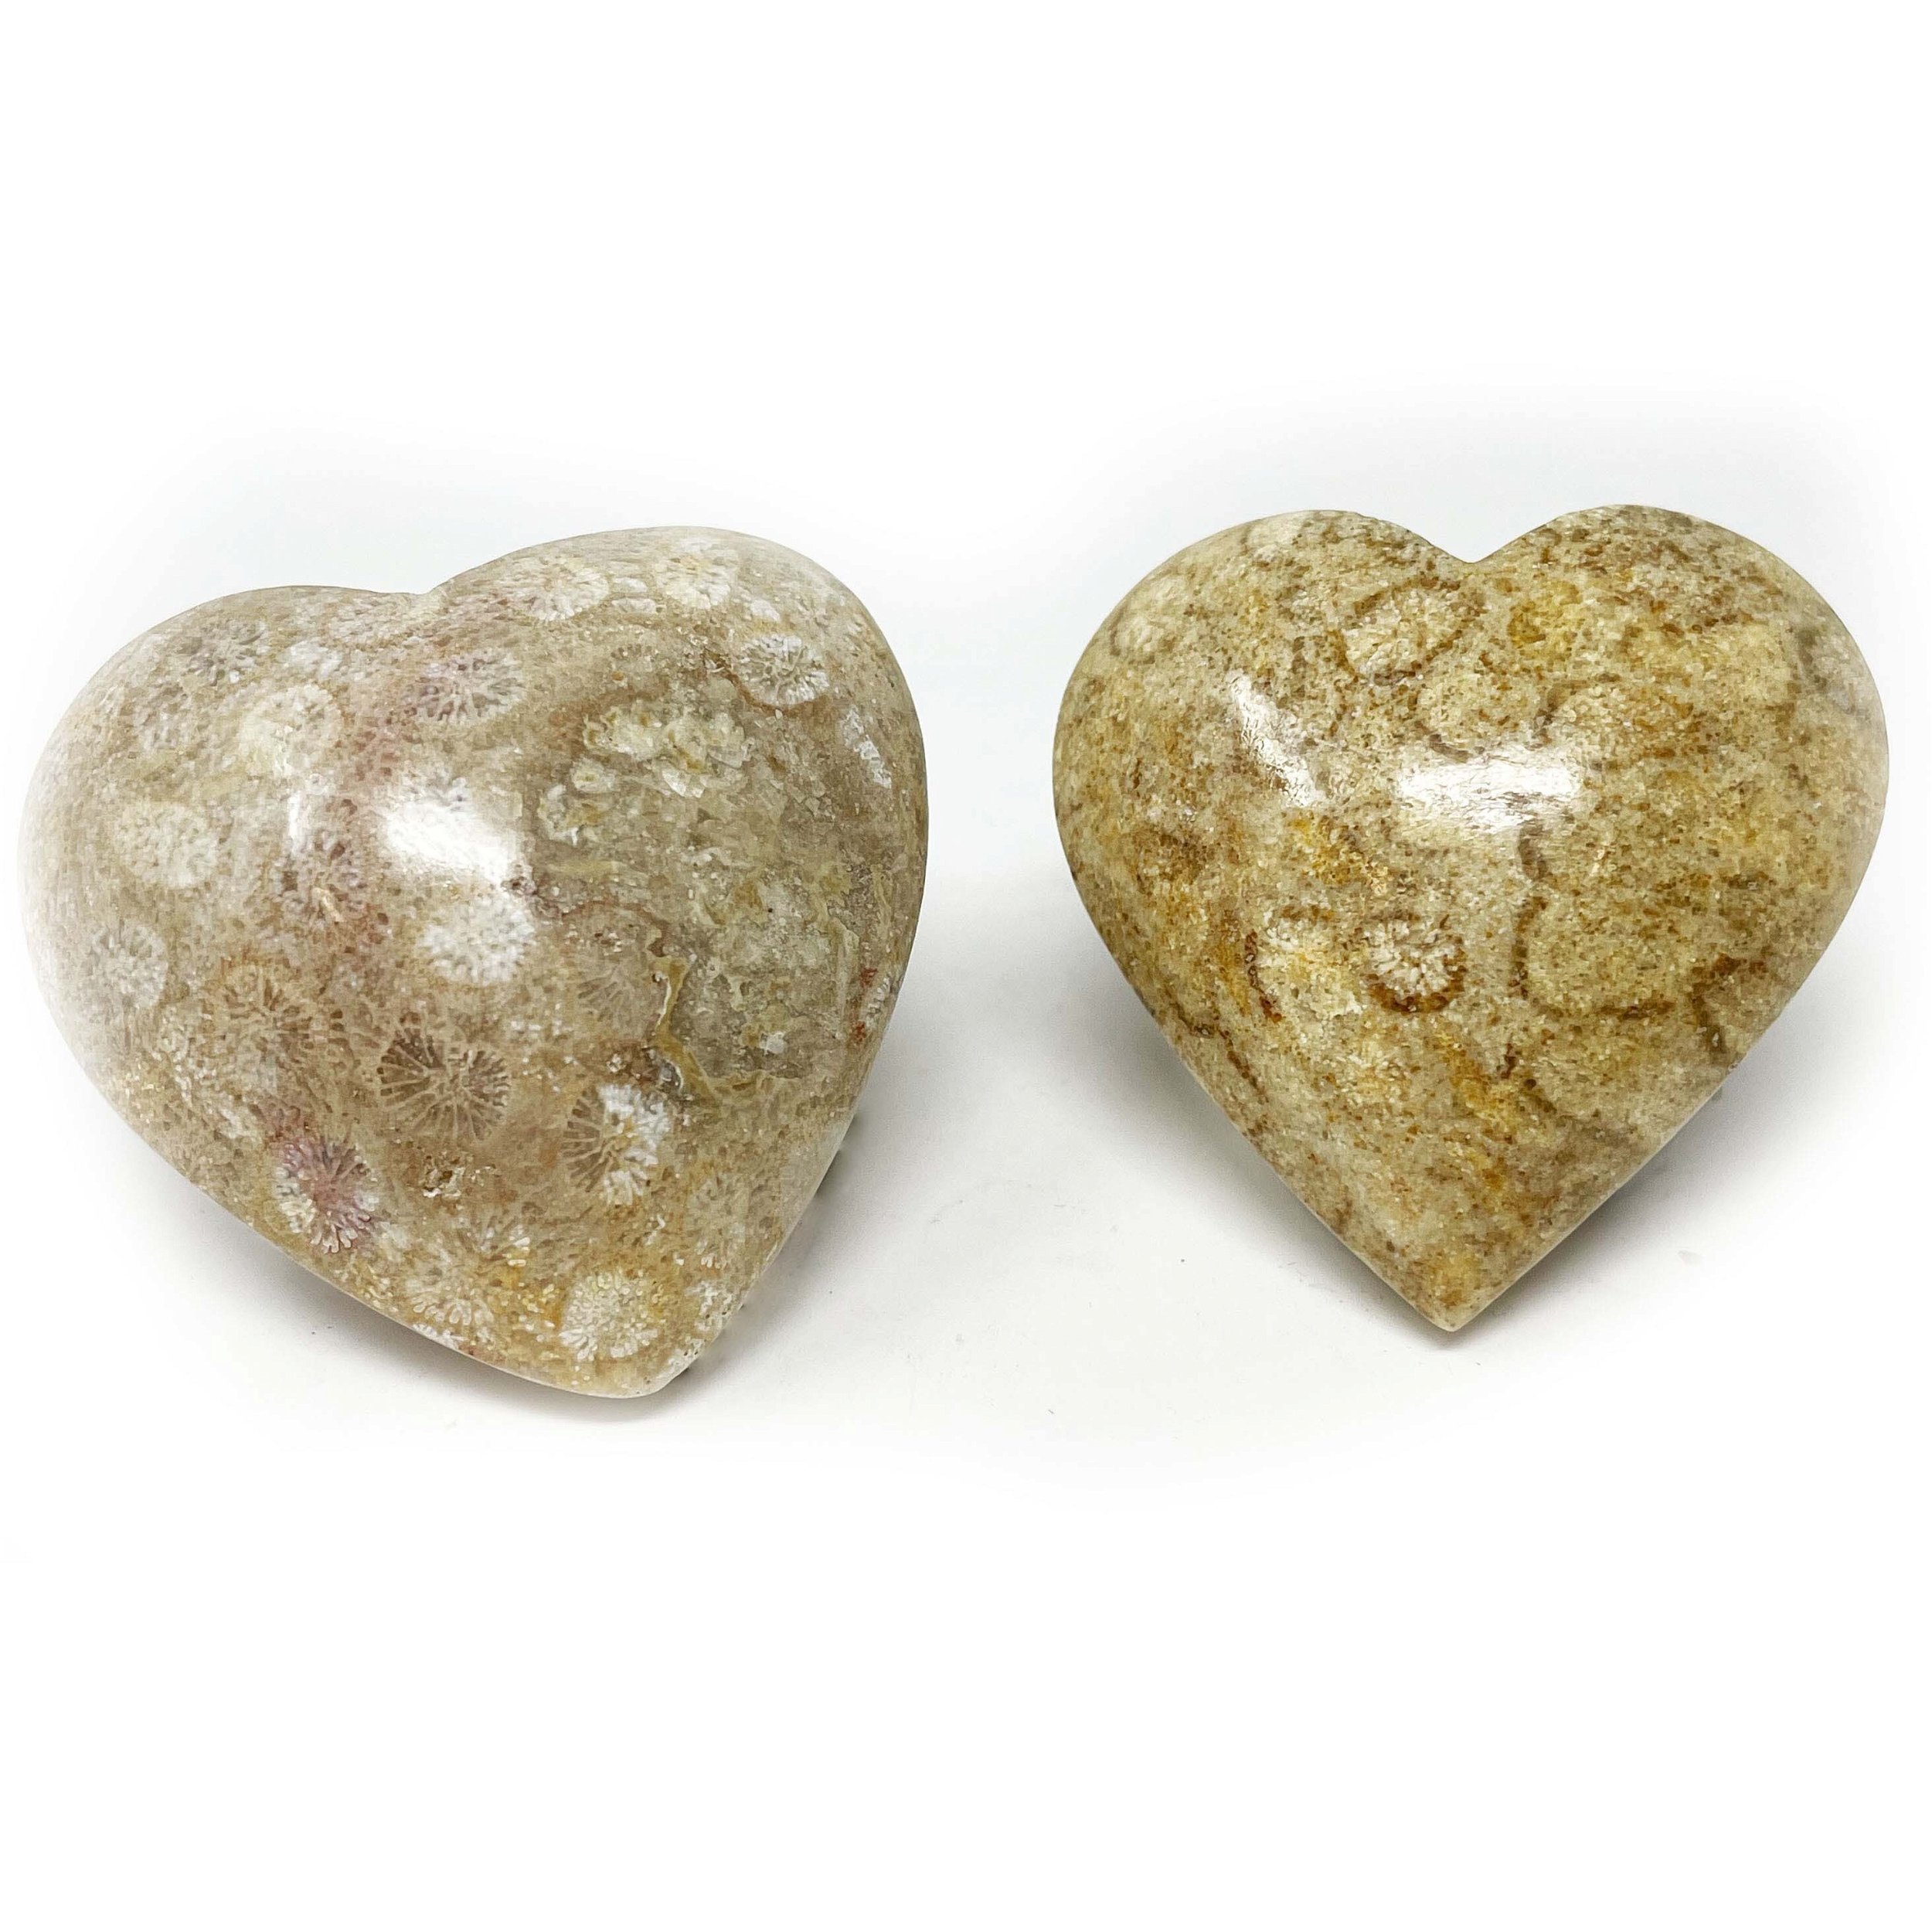 Fossilized Coral Heart From Indonesia (Singles)